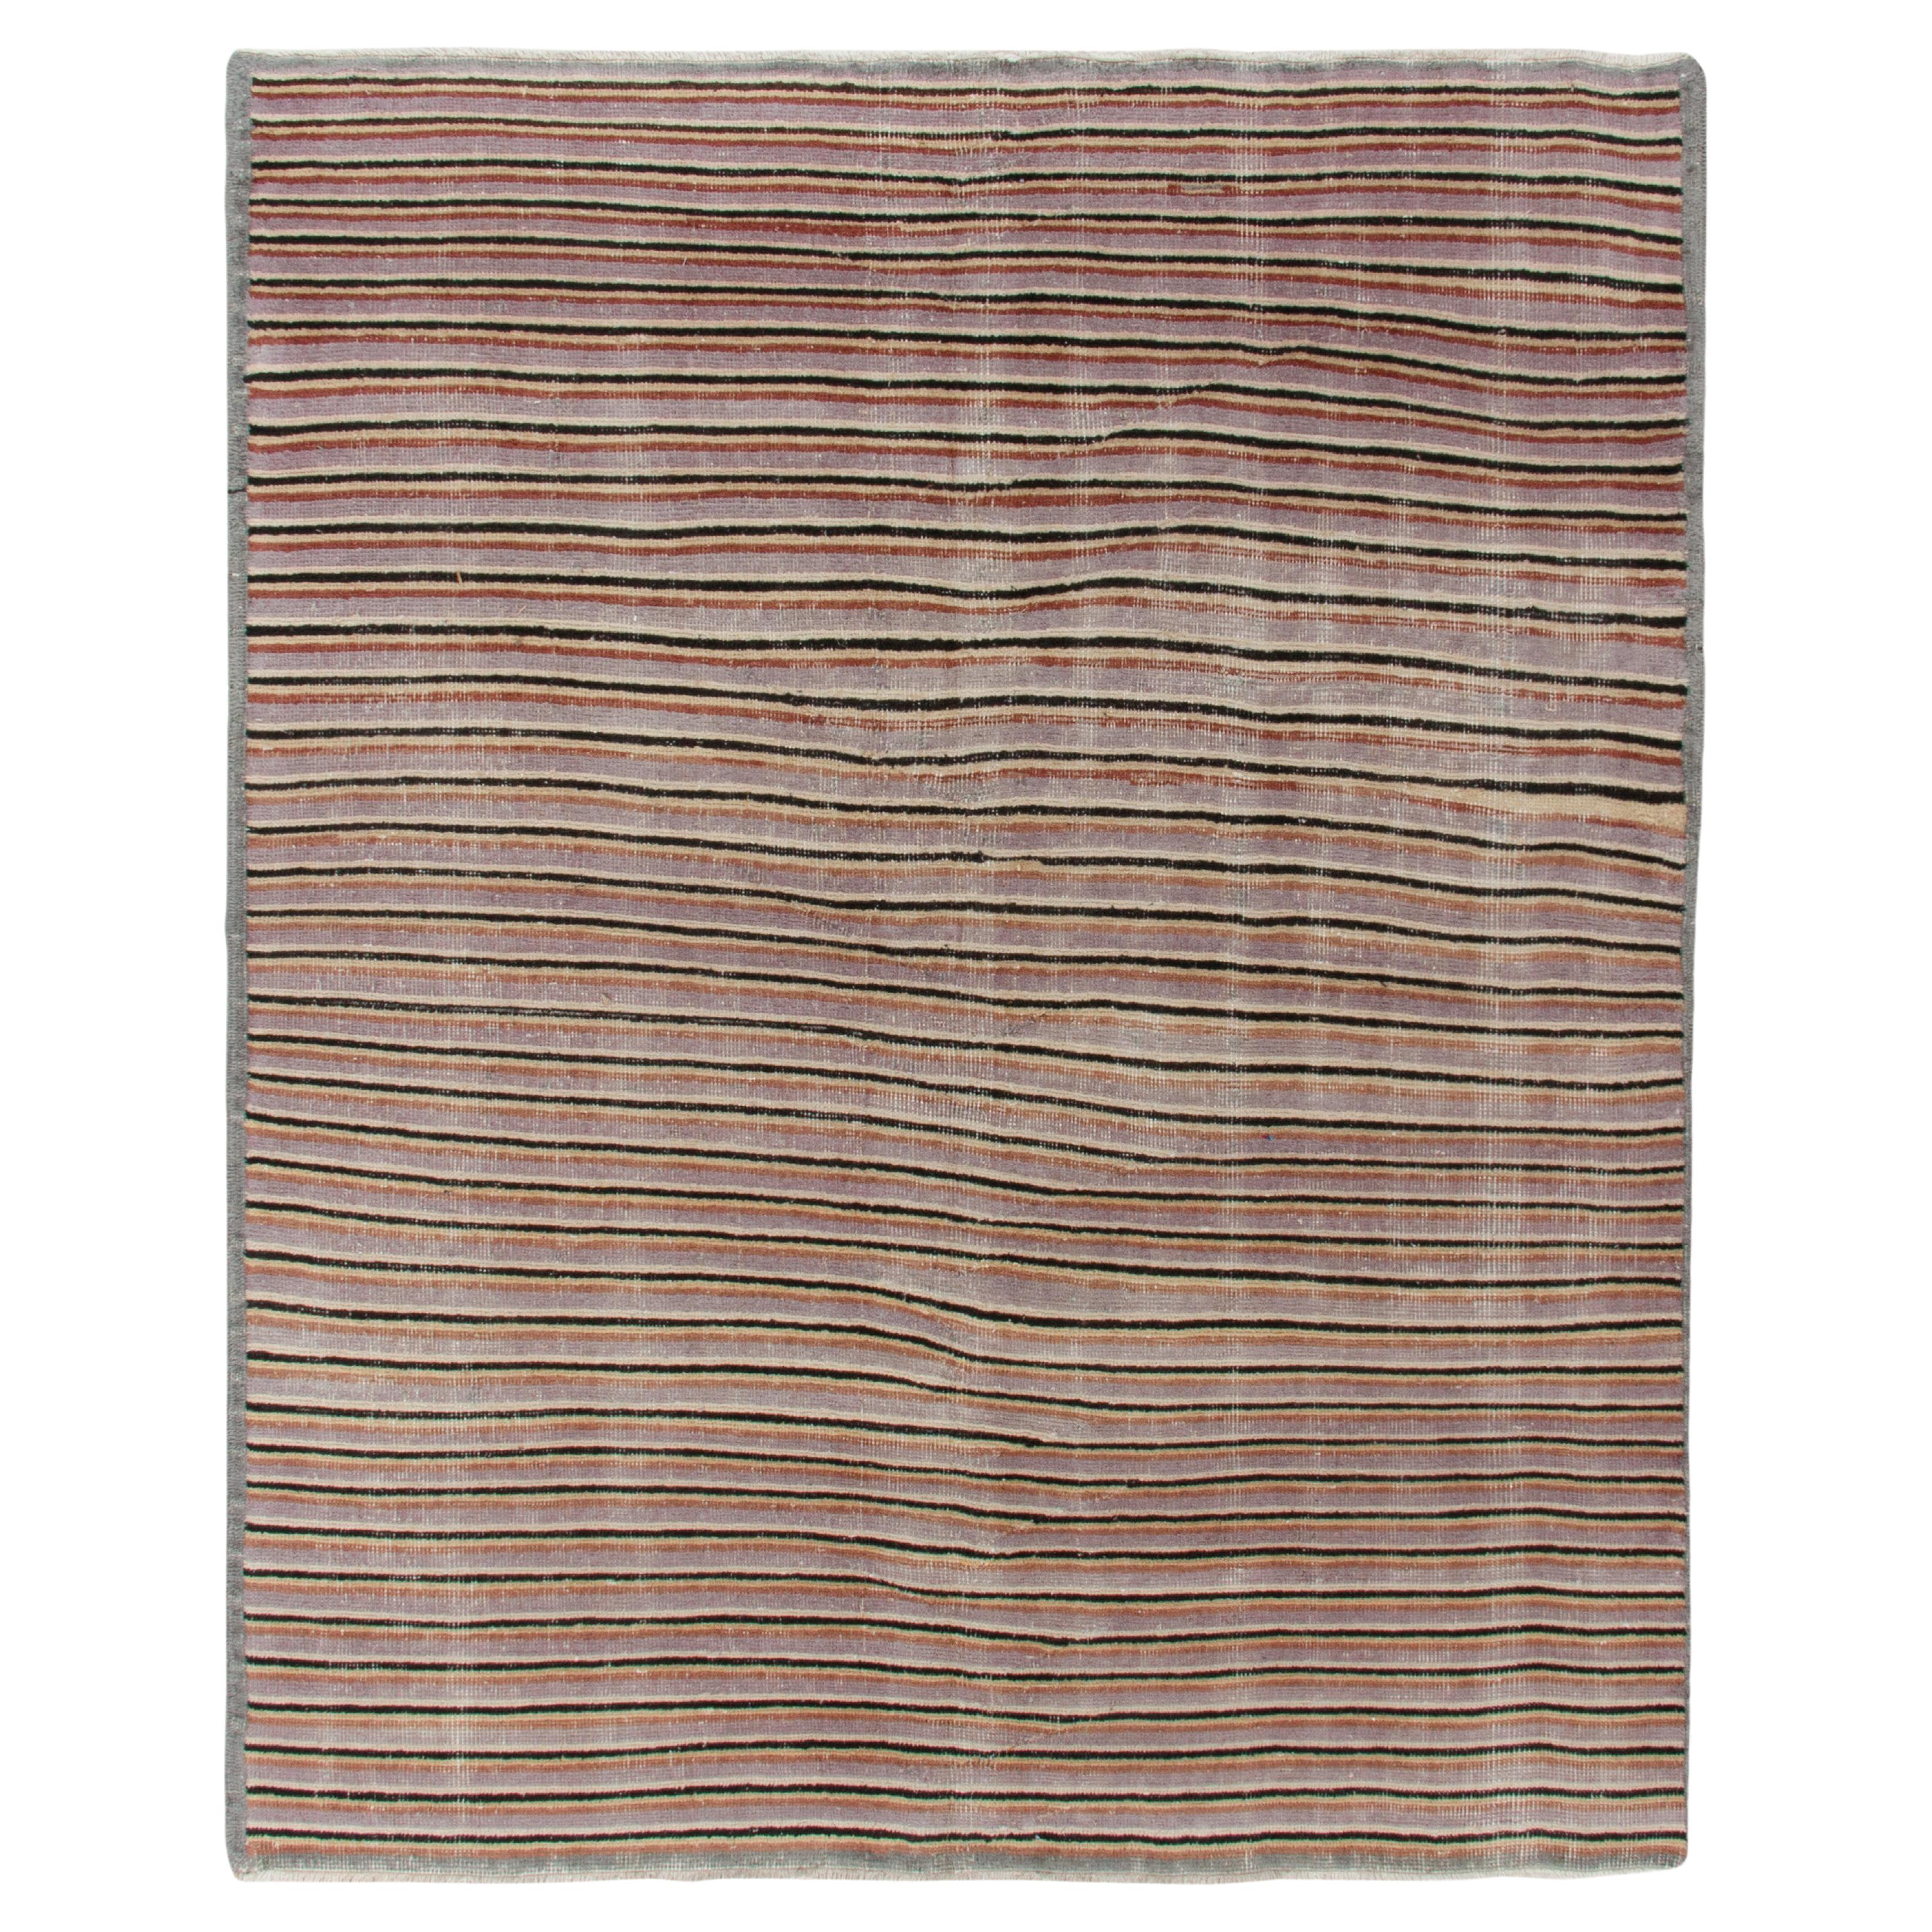 1960s Vintage Distressed Rug in Gray, Brown Striped Pattern by Rug & Kilim For Sale